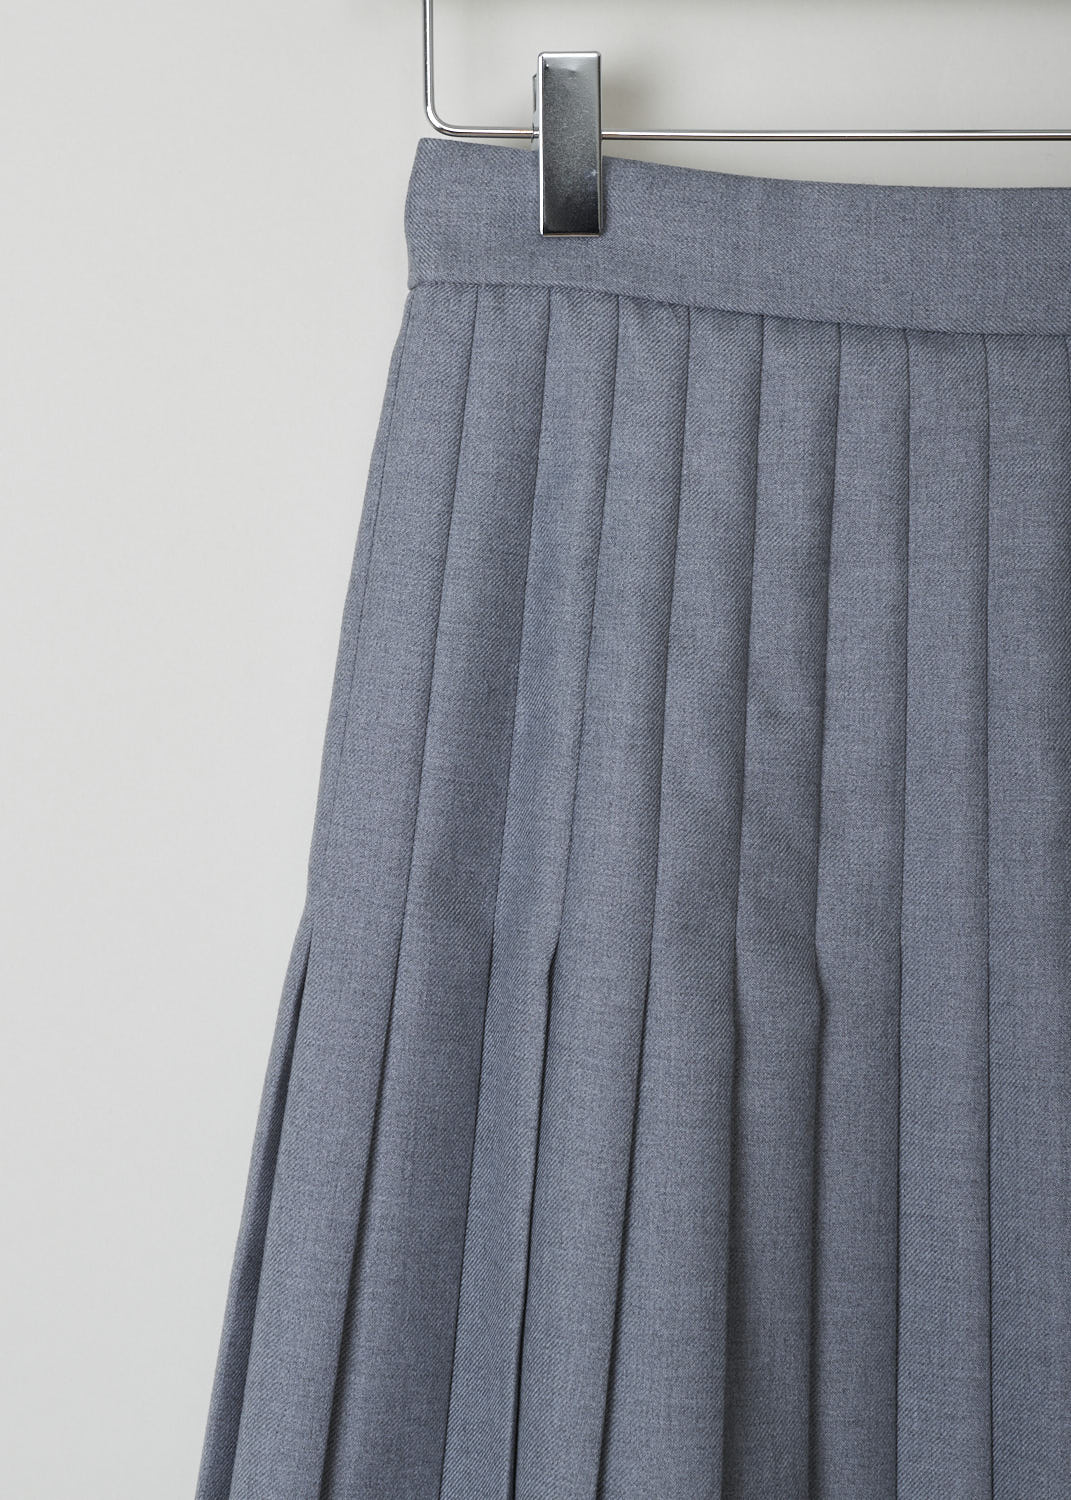 THOM BROWNE, BELOW THE KNEE GREY PLEATED SKIRT, FGC513A_02055_035_MED_GREY, Grey, Detail, Grey pleated skirt reminiscent of a school uniform. This circle skirt has knife pleats throughout. It has a concealed zip and clasp on the side seam. In the back, the grosgrain pull tab can be found. 
